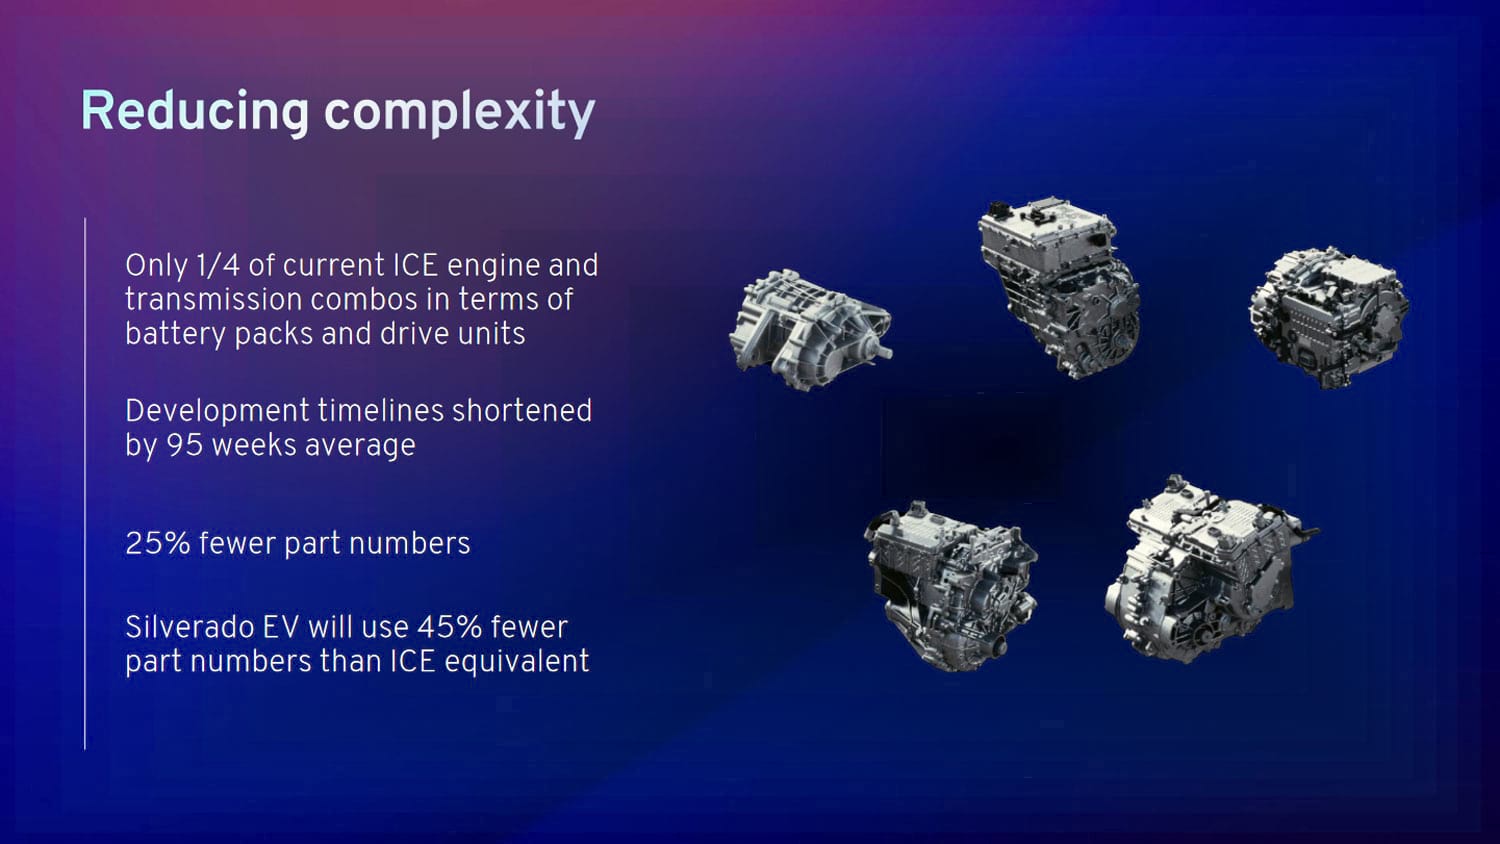 GM-Ultium-Reducing-Complexity-Compared-To-ICE-Powertrains-Investor-Day-Presentation-November-2...jpg